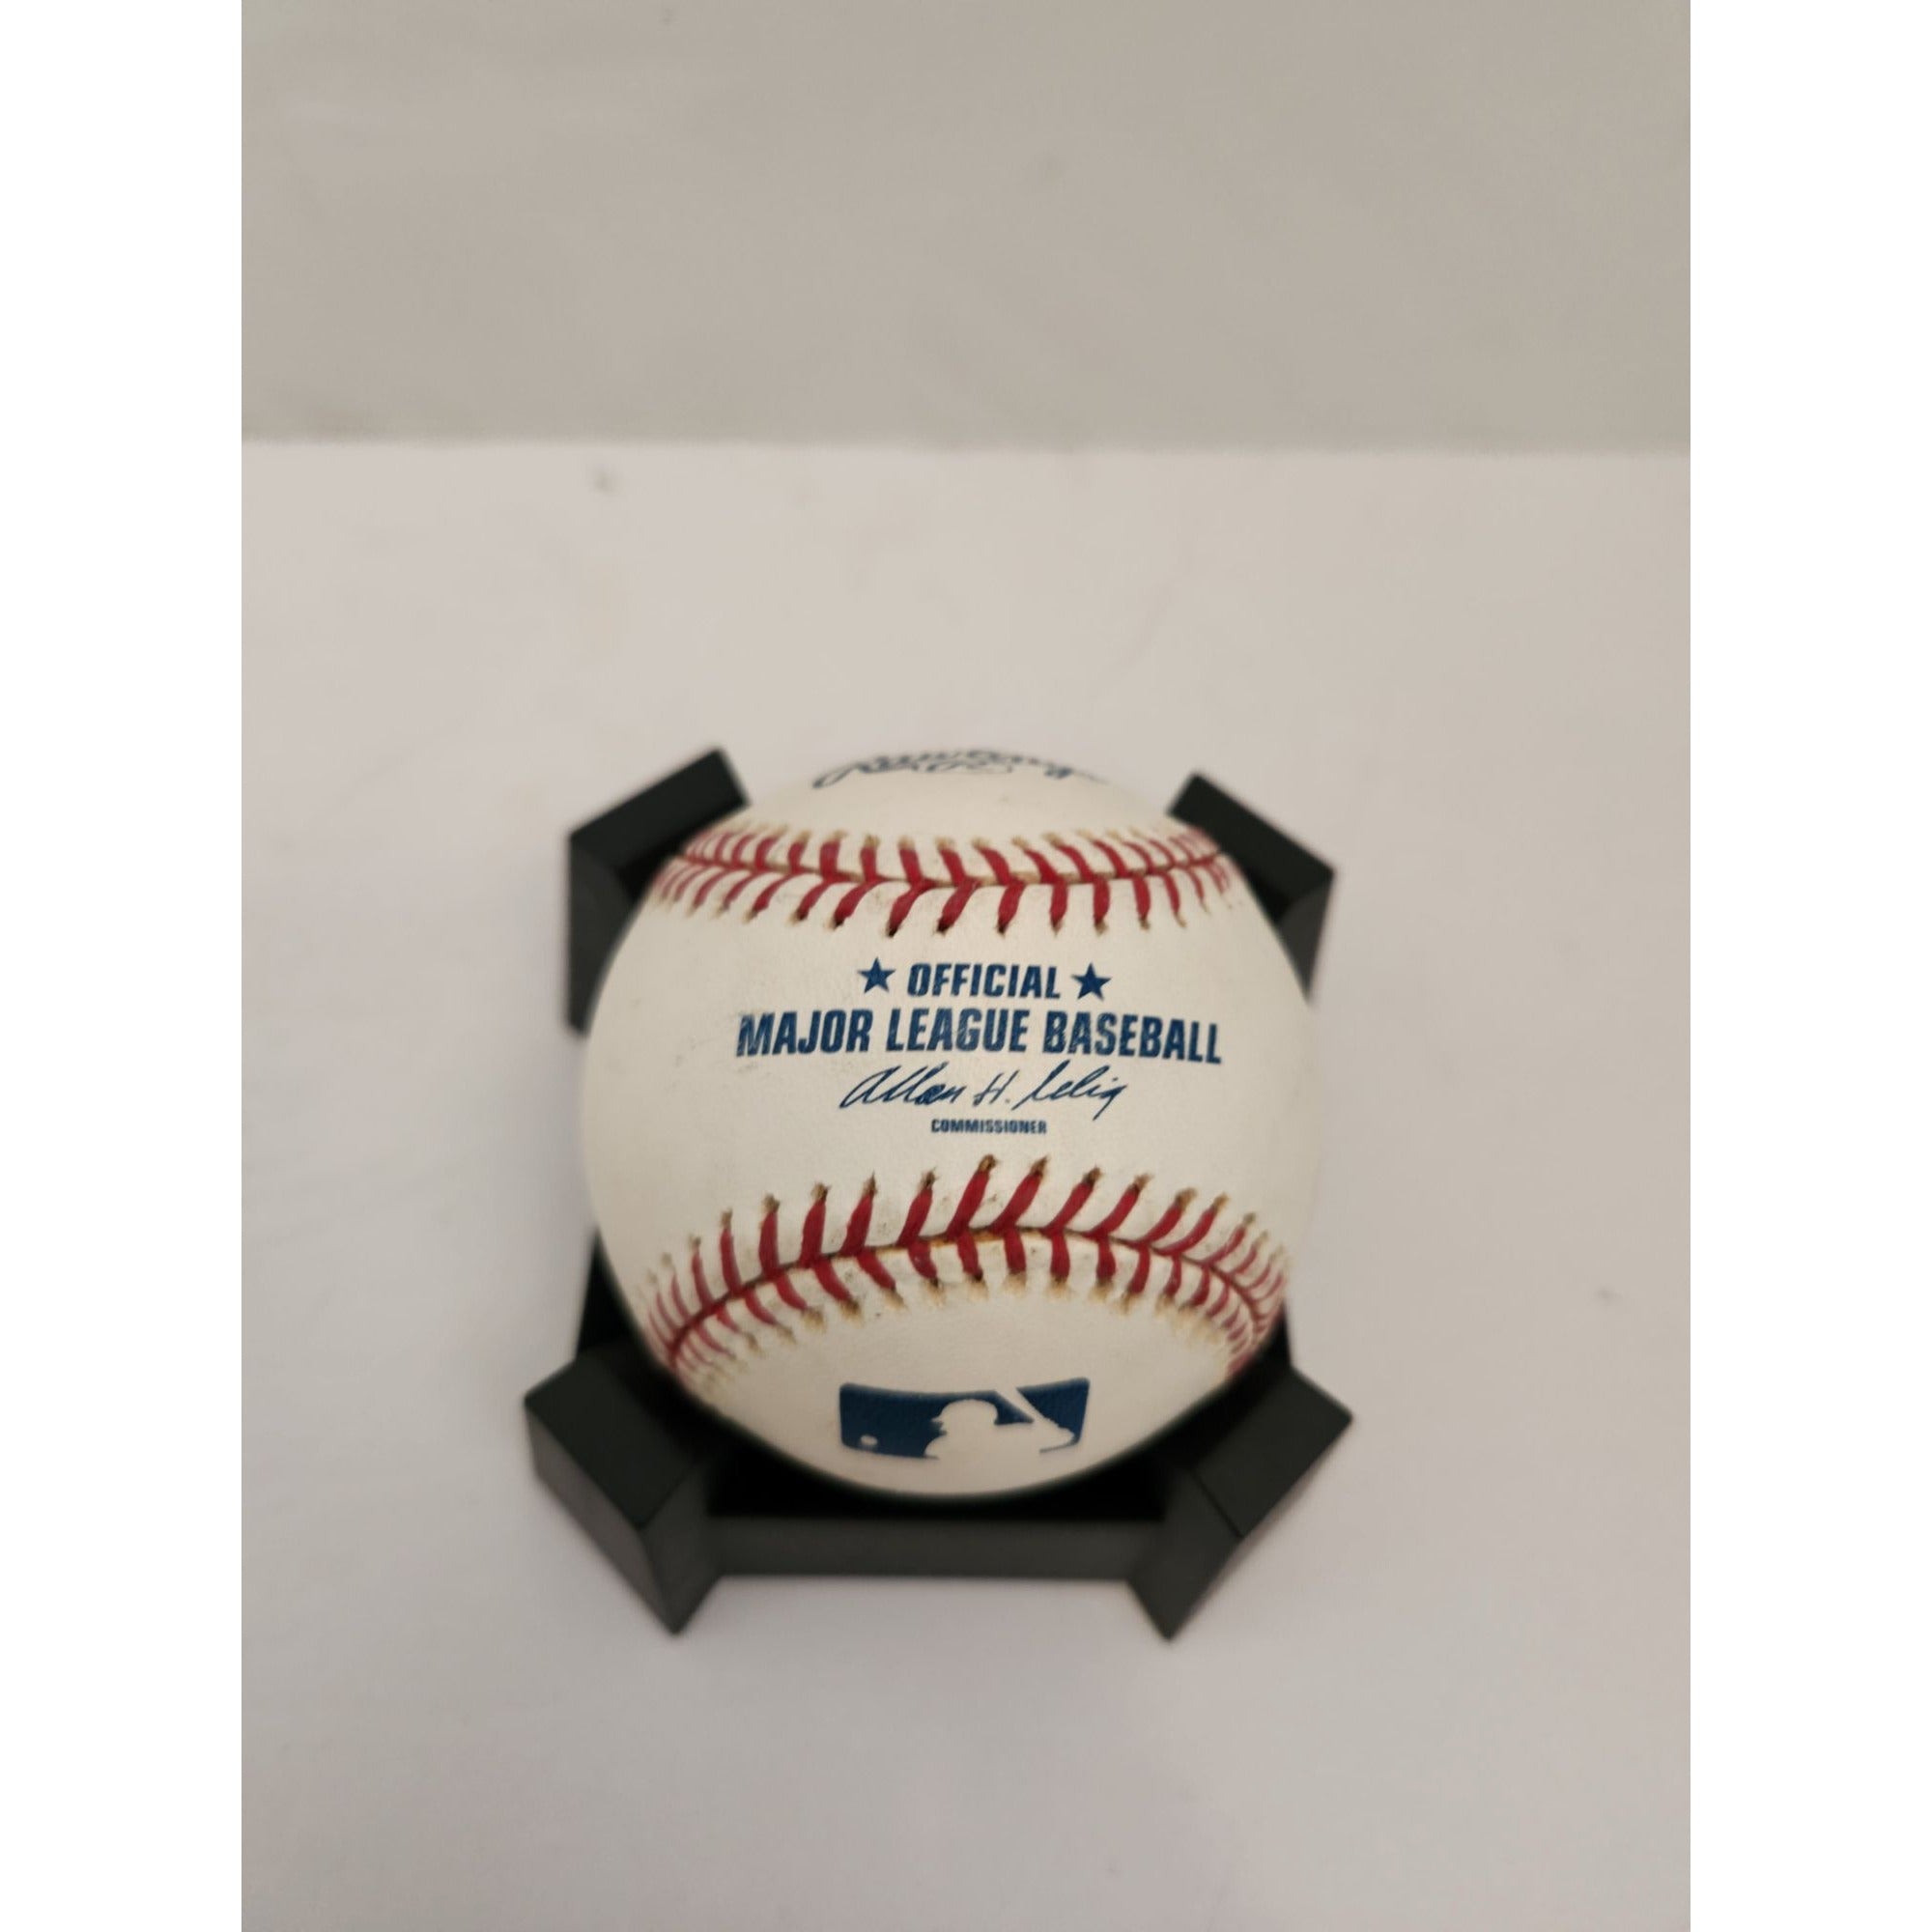 Tiger Woods official MLB baseball signed with proof